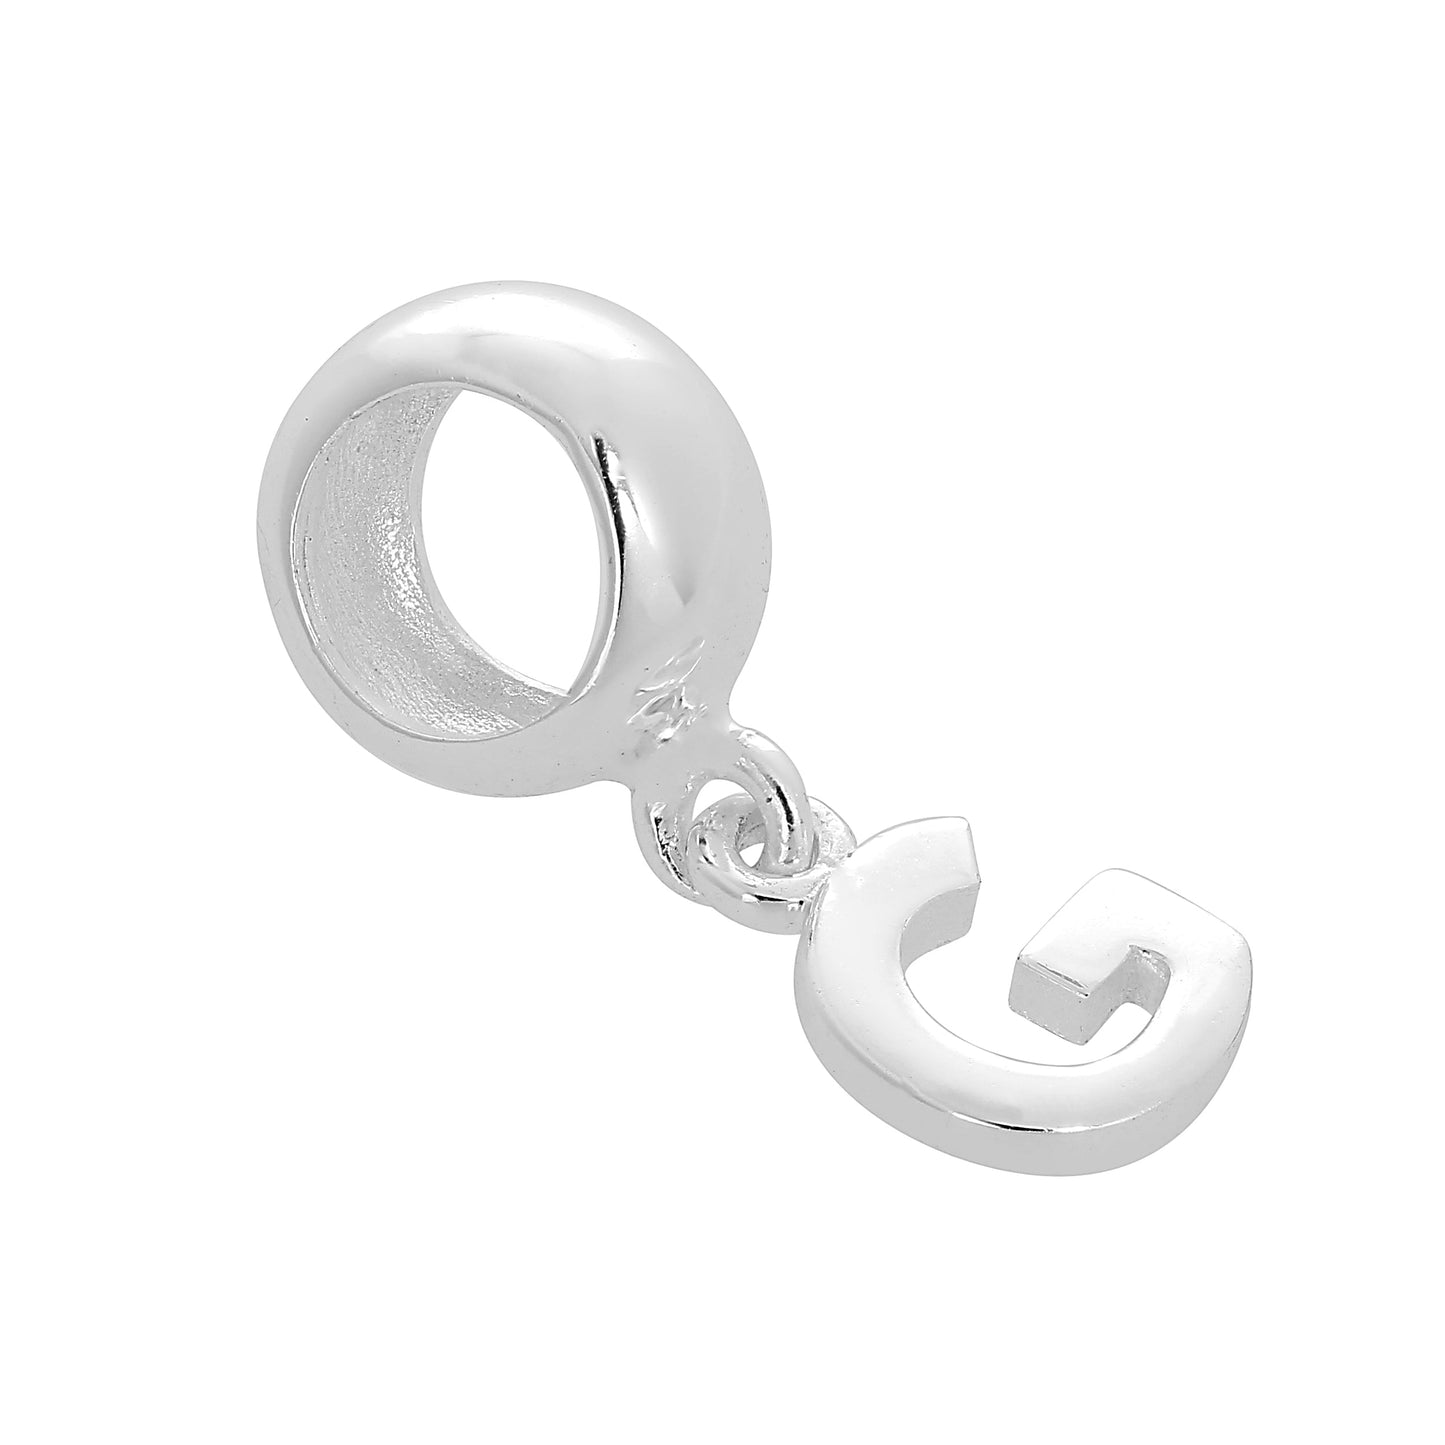 Sterling Silver Hanging Alphabet Letter Bead Charm A - Z